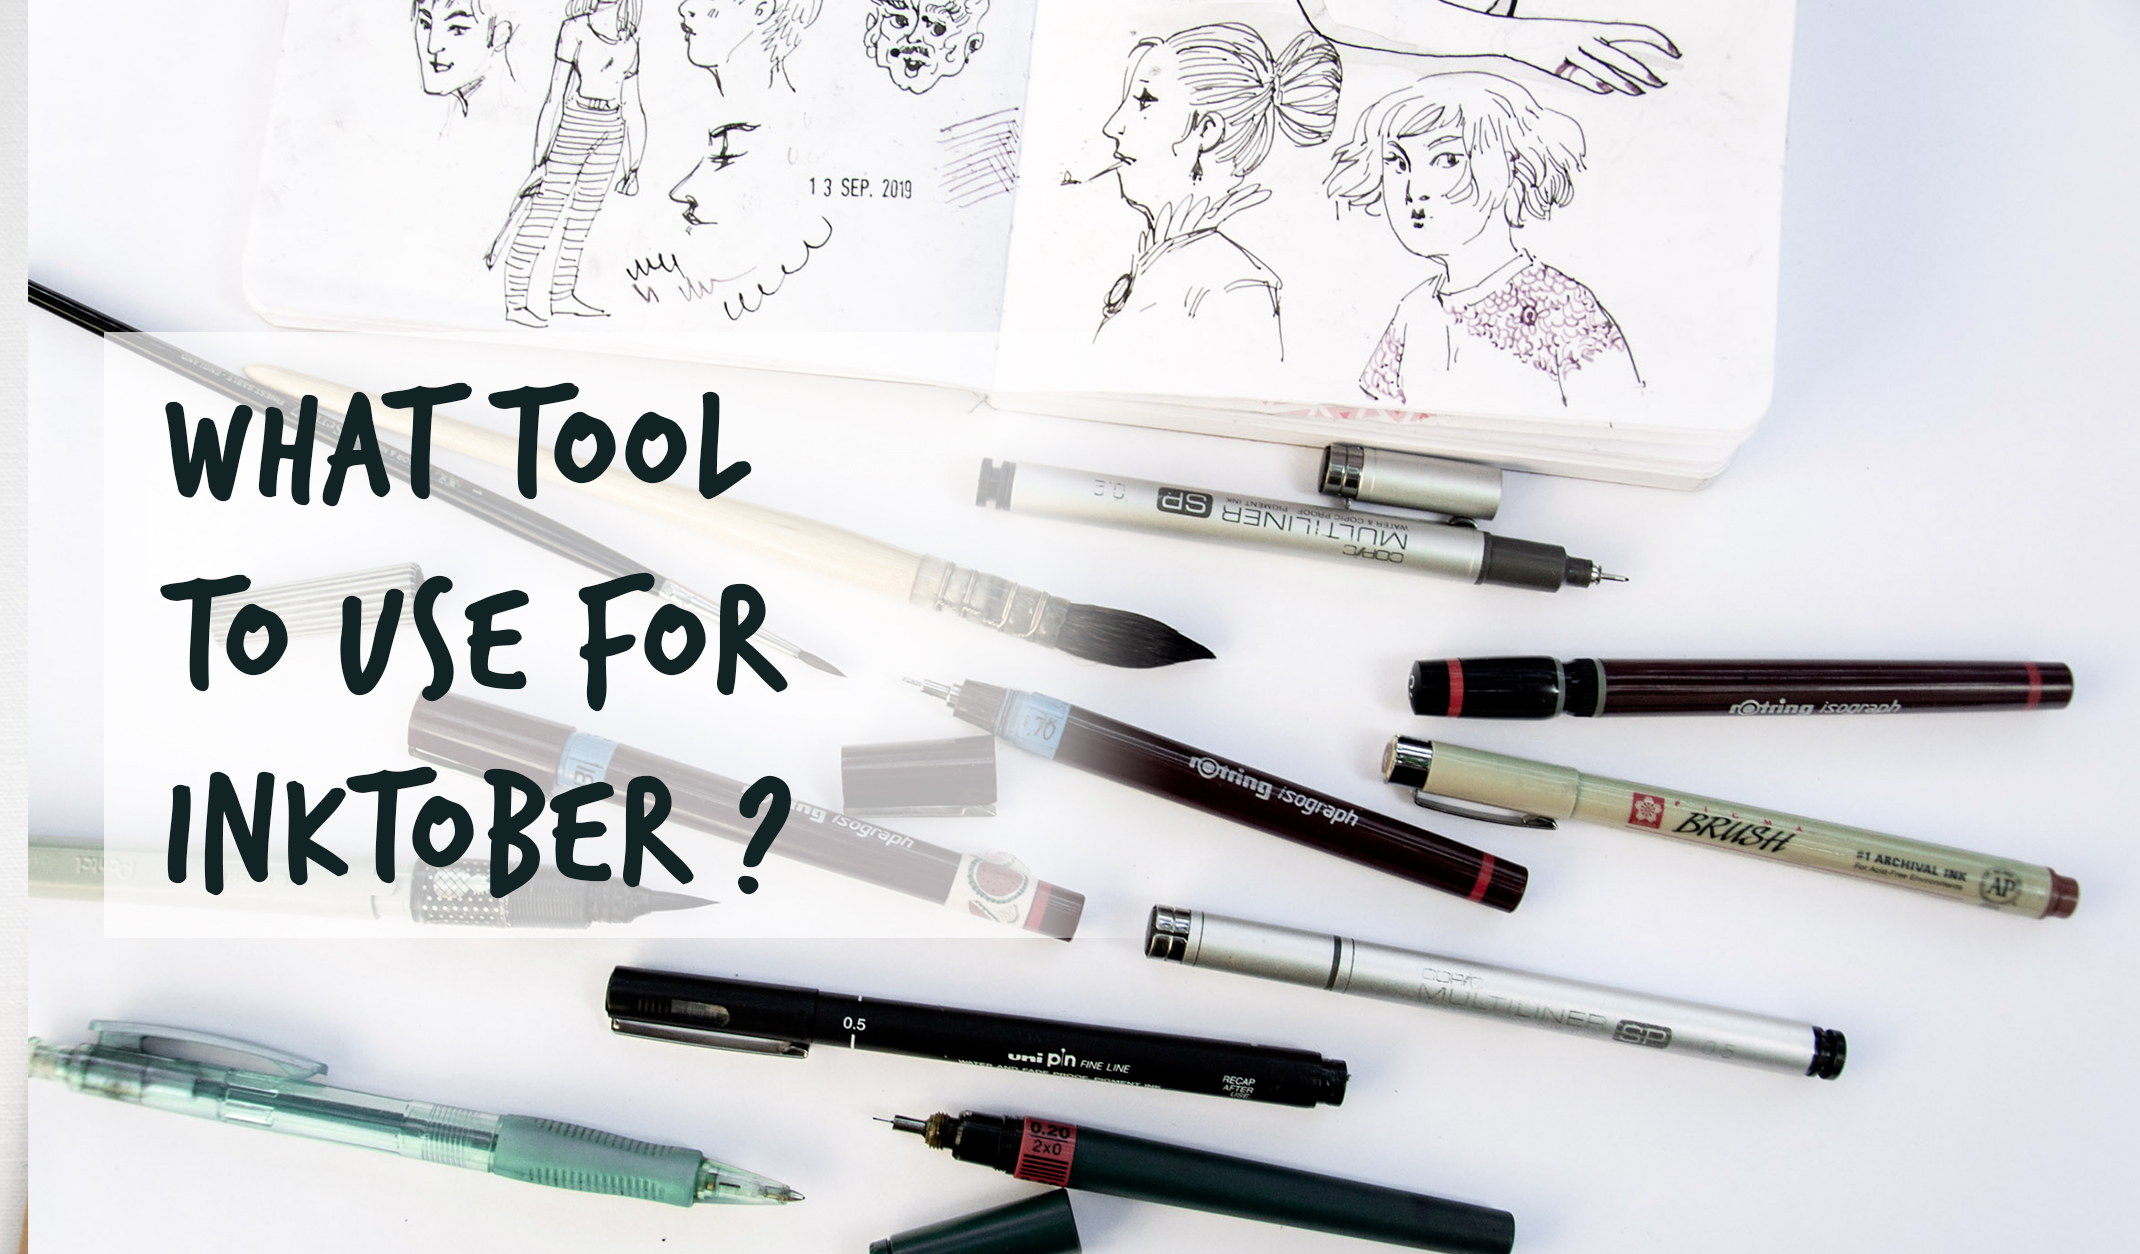 What tools to use for inktober ?